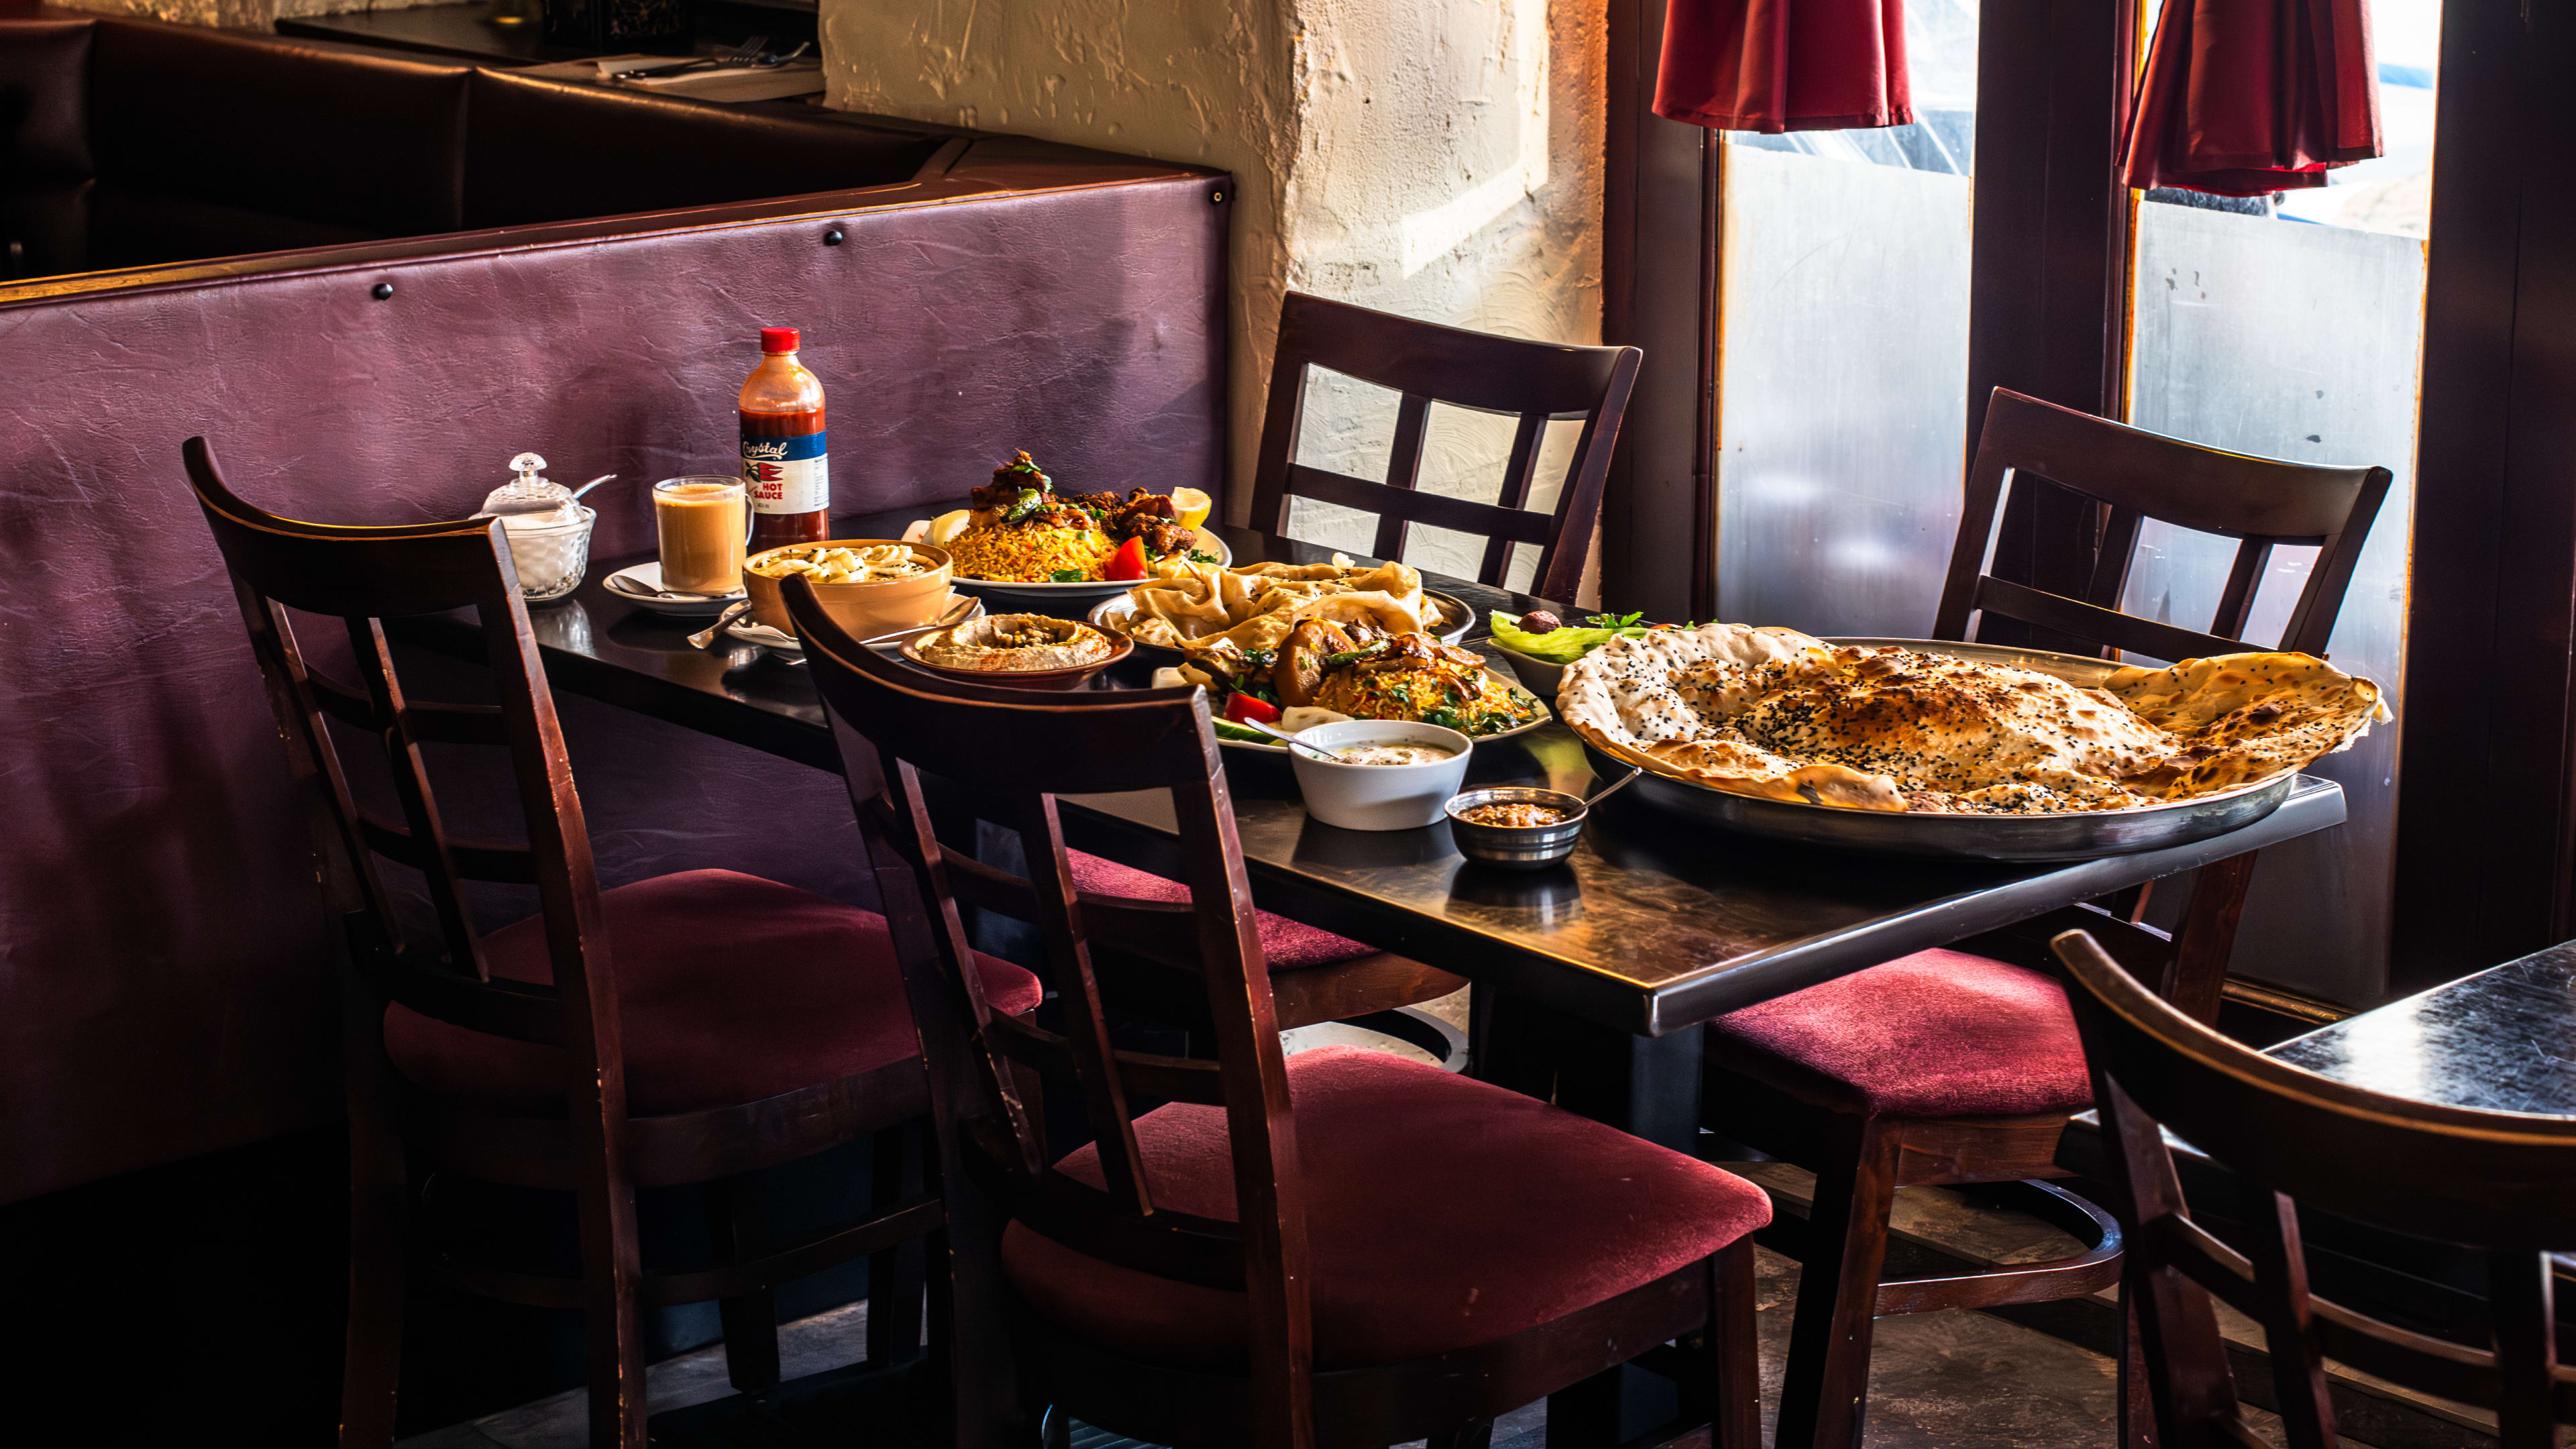 A spread of Yemeni food on a wooden table with four wooden chairs with red cushions.